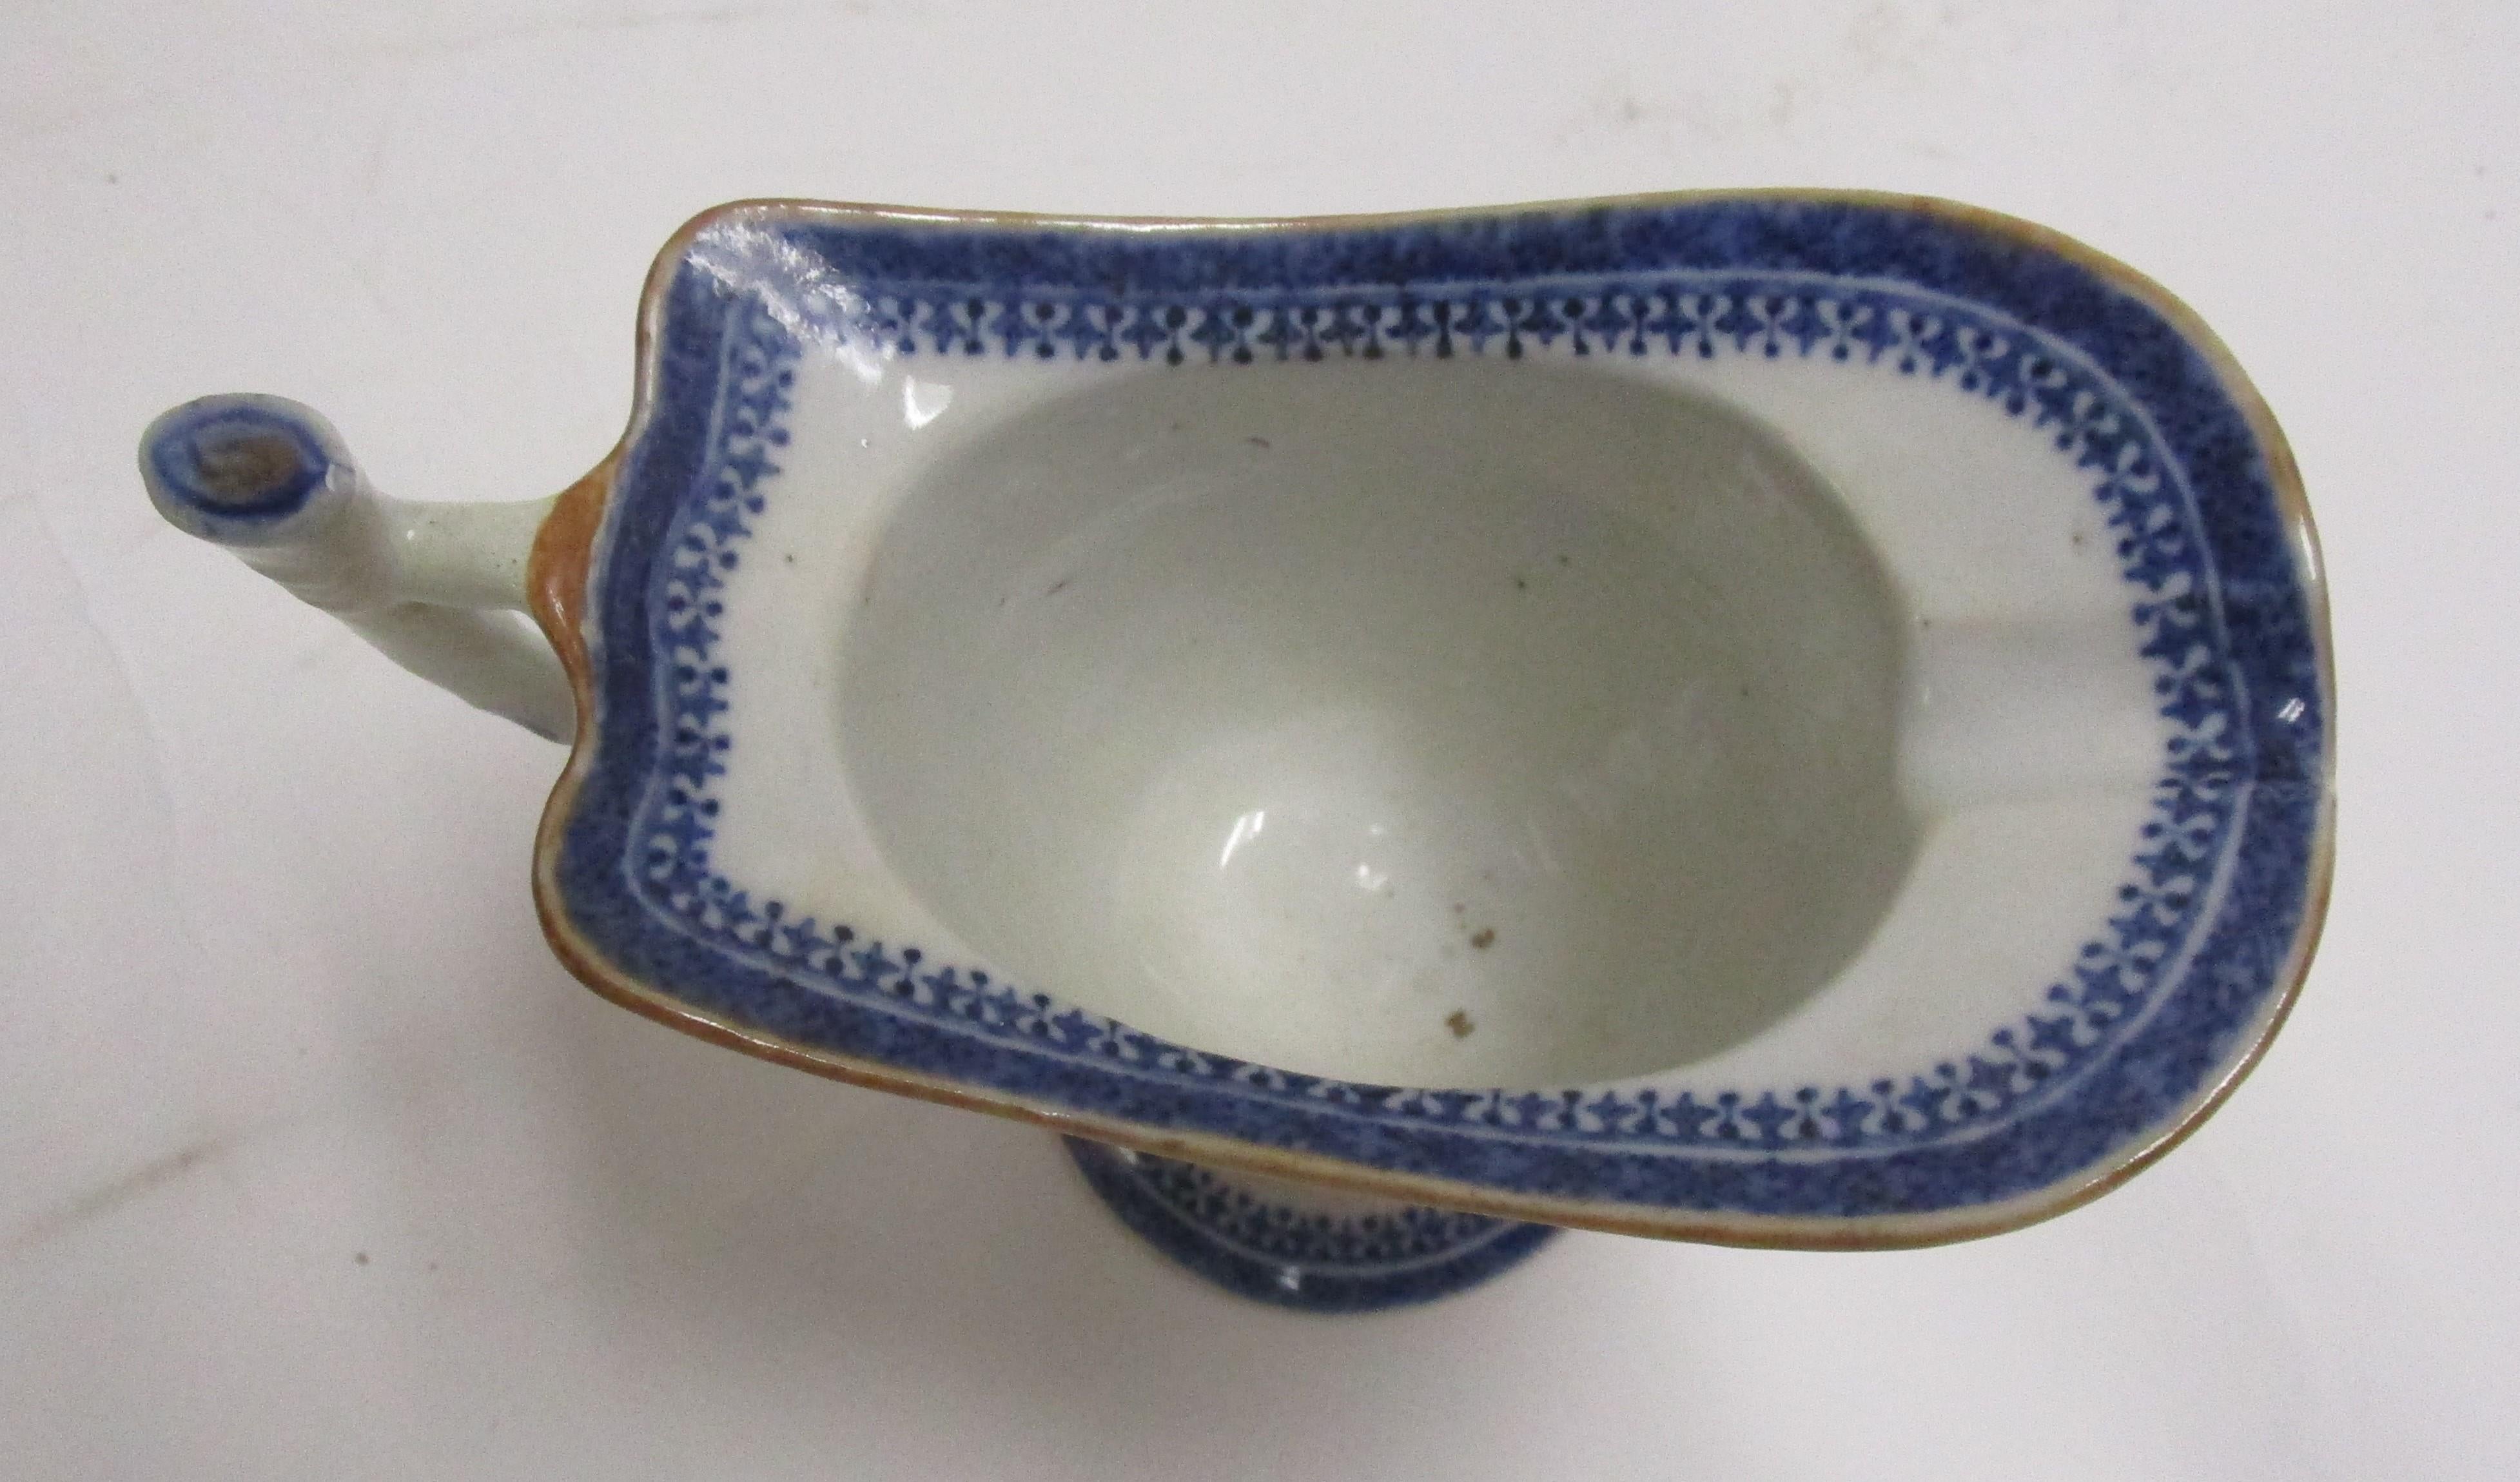 This very fine Chinese Export hand decorated blue and white porcelain creamer is an unusual 